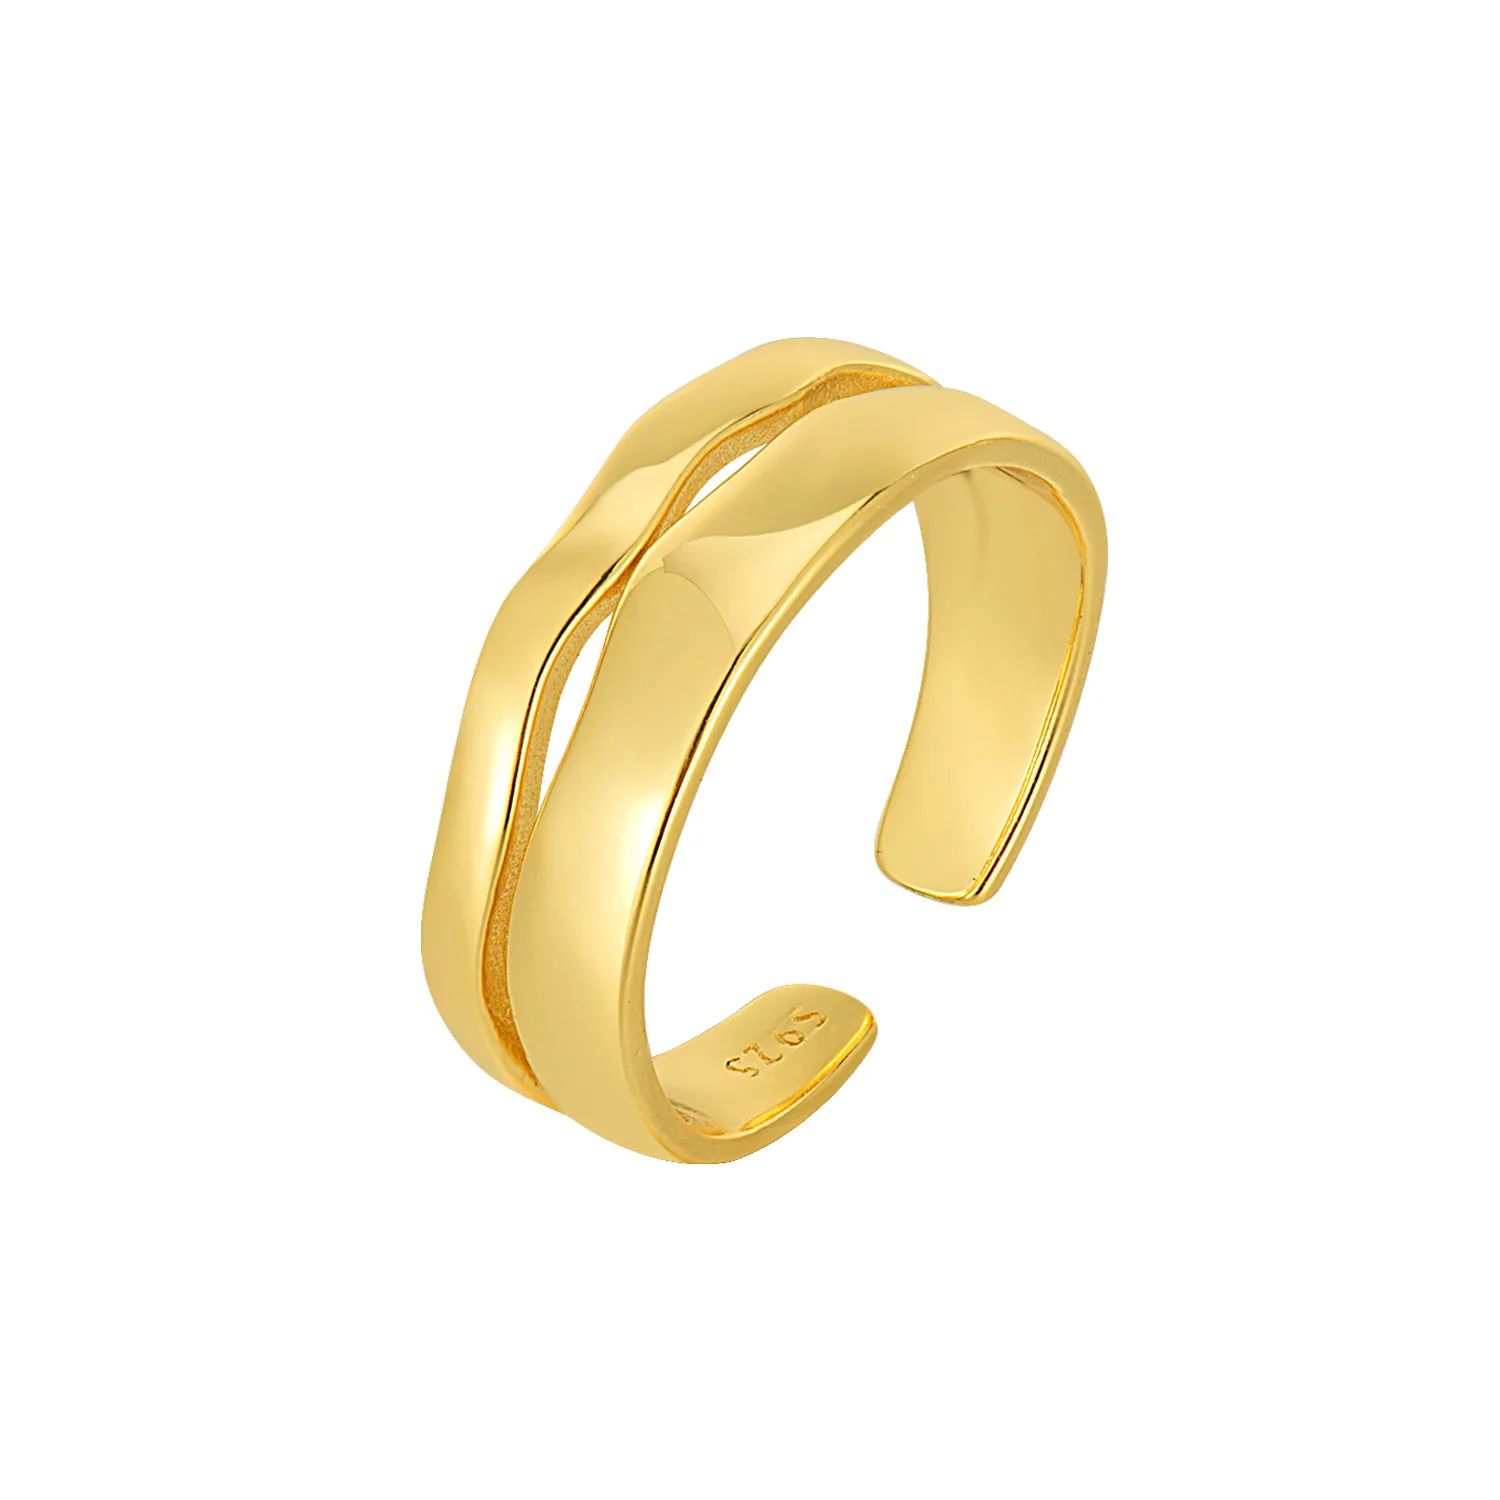 

VCR1 Twist Ring Bread Shape Silver Color Gold Color Rings For Women Accessories Finger Fashion Jewelry Gifts smartbuy